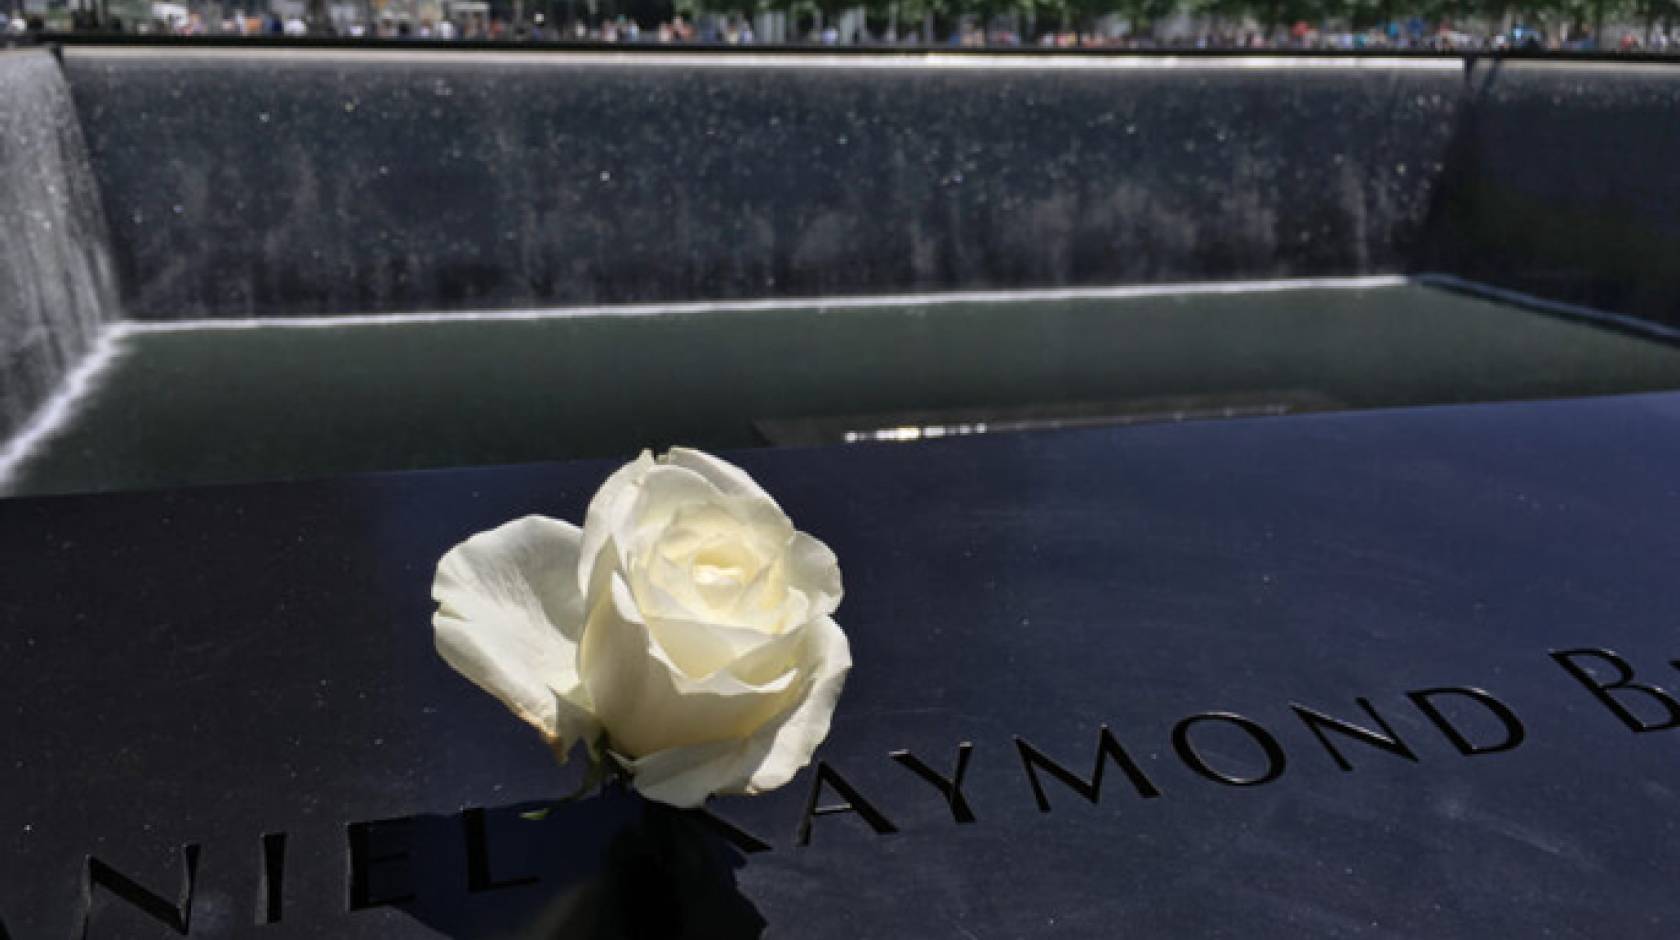 9/11 memorial with a white rose